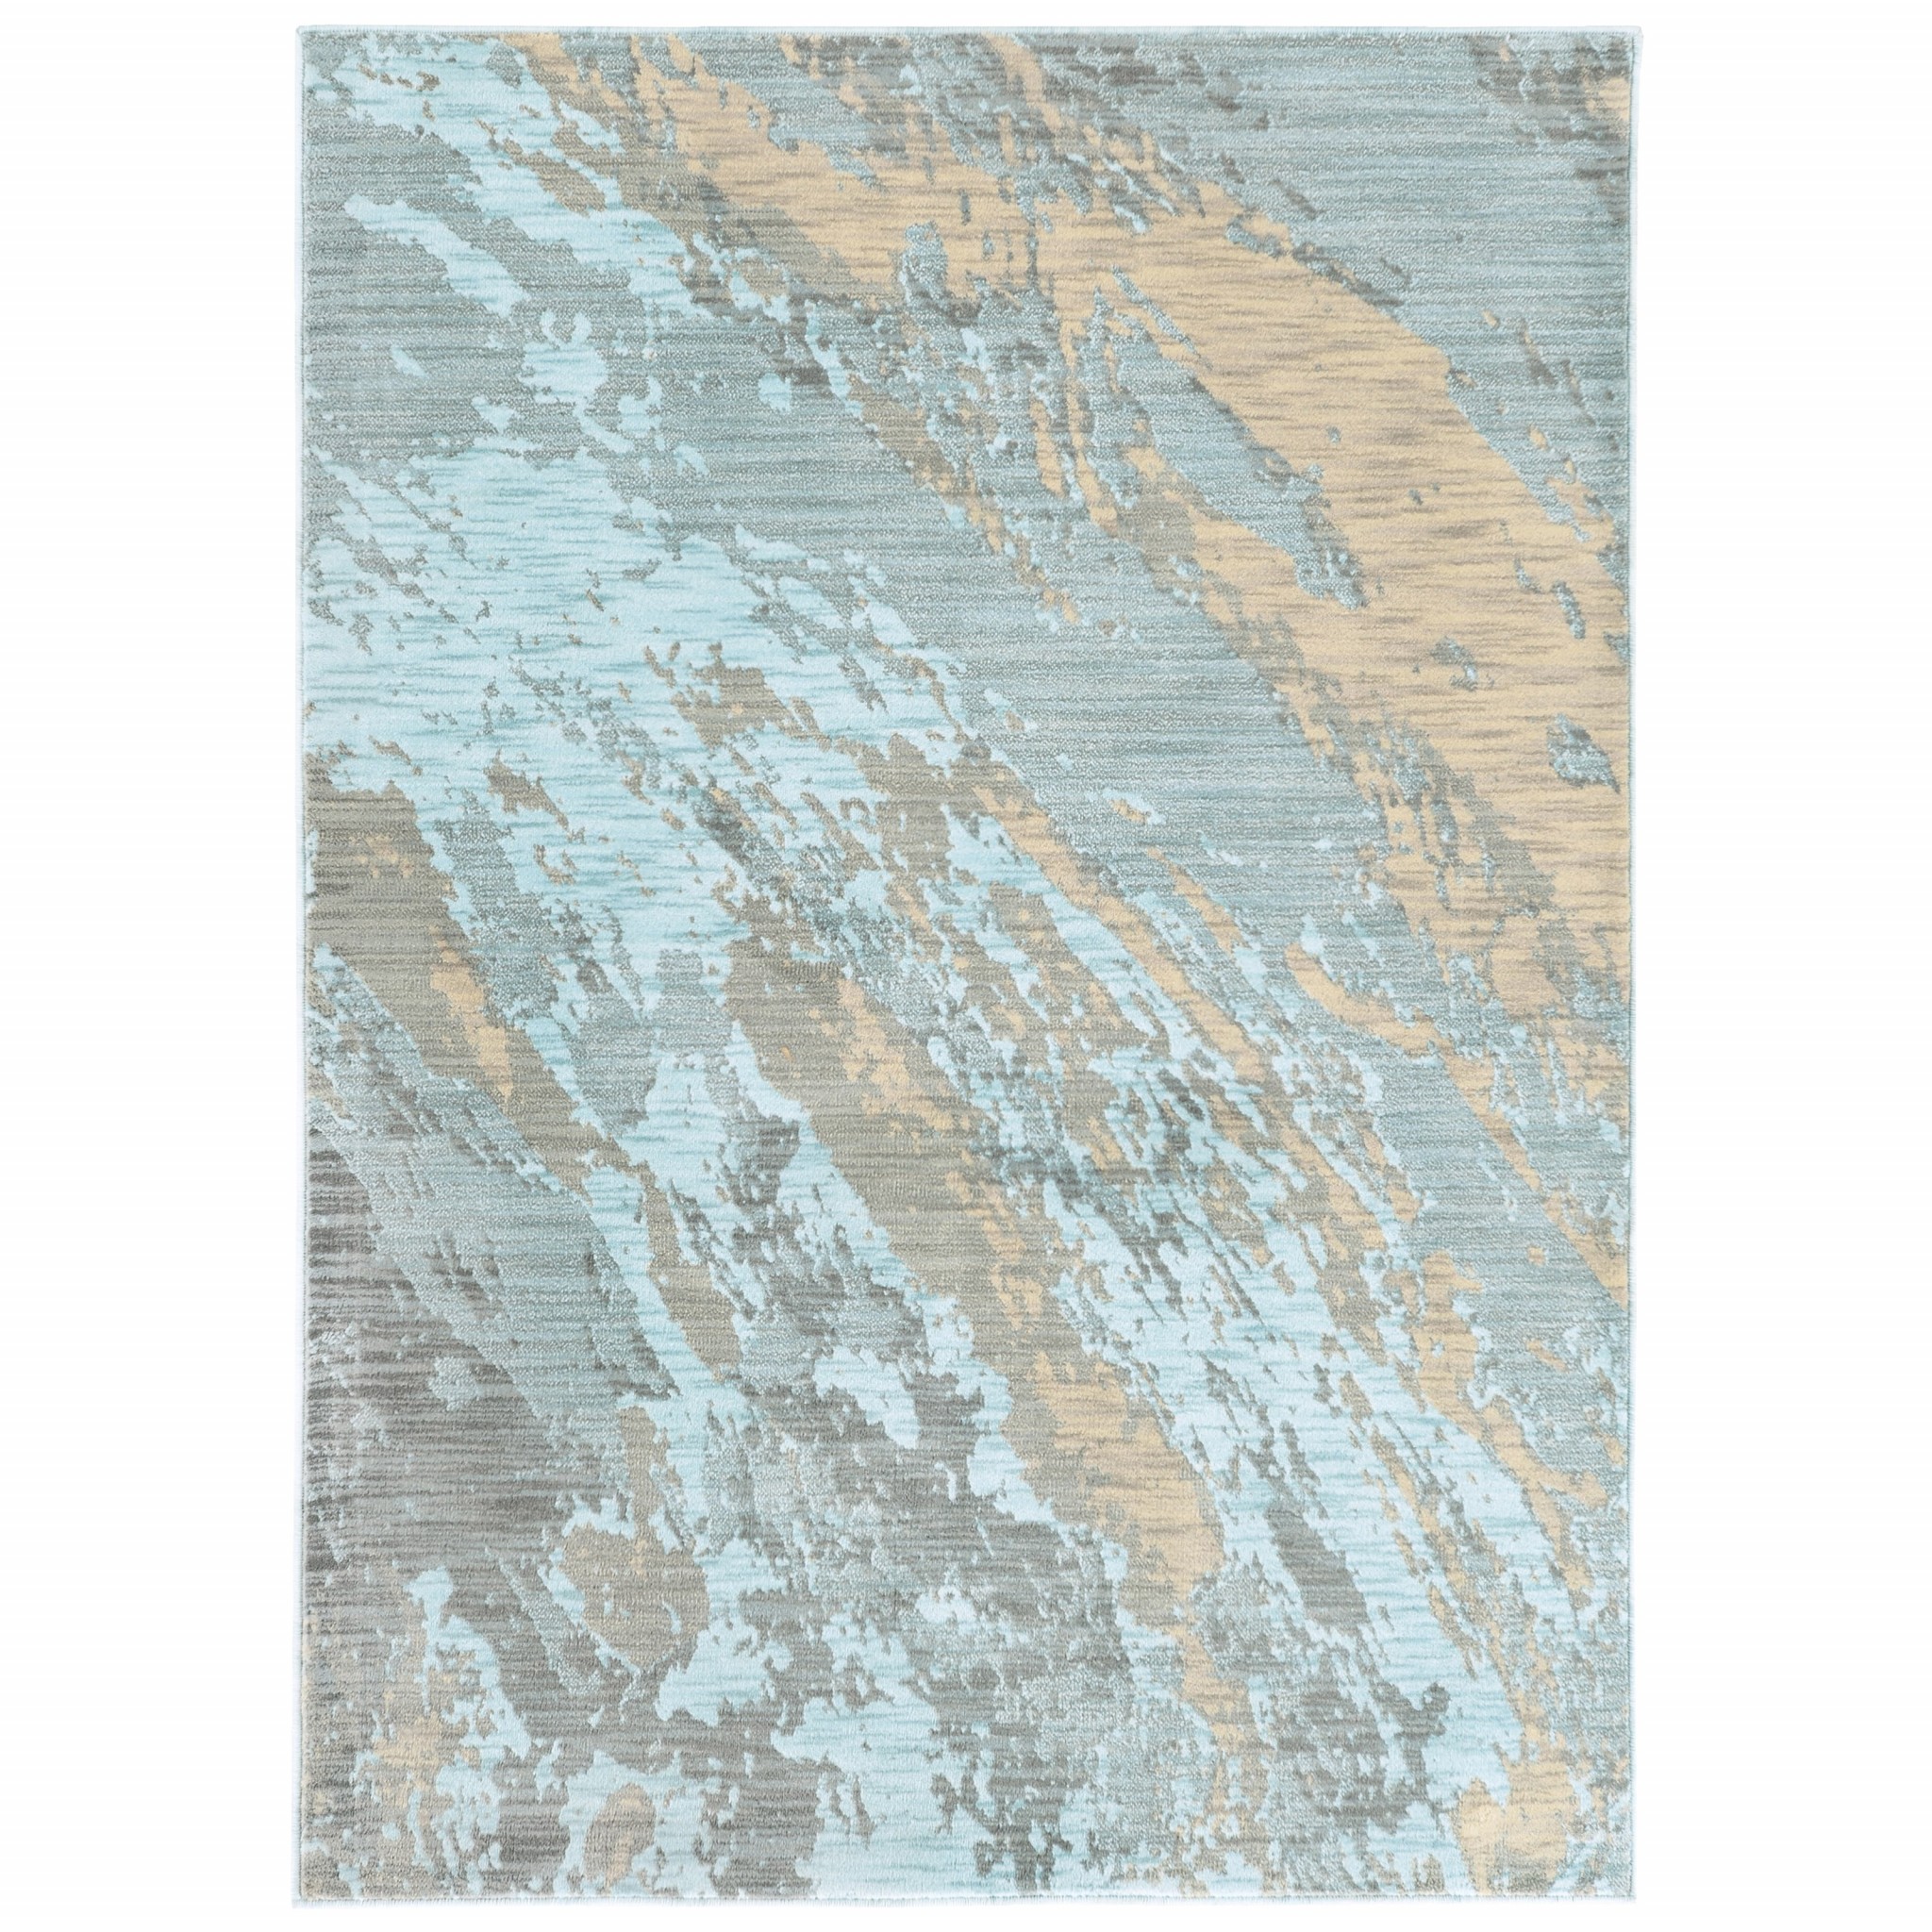 2’X3’ Blue And Gray Abstract Impasto Scatter Rug-388814-1